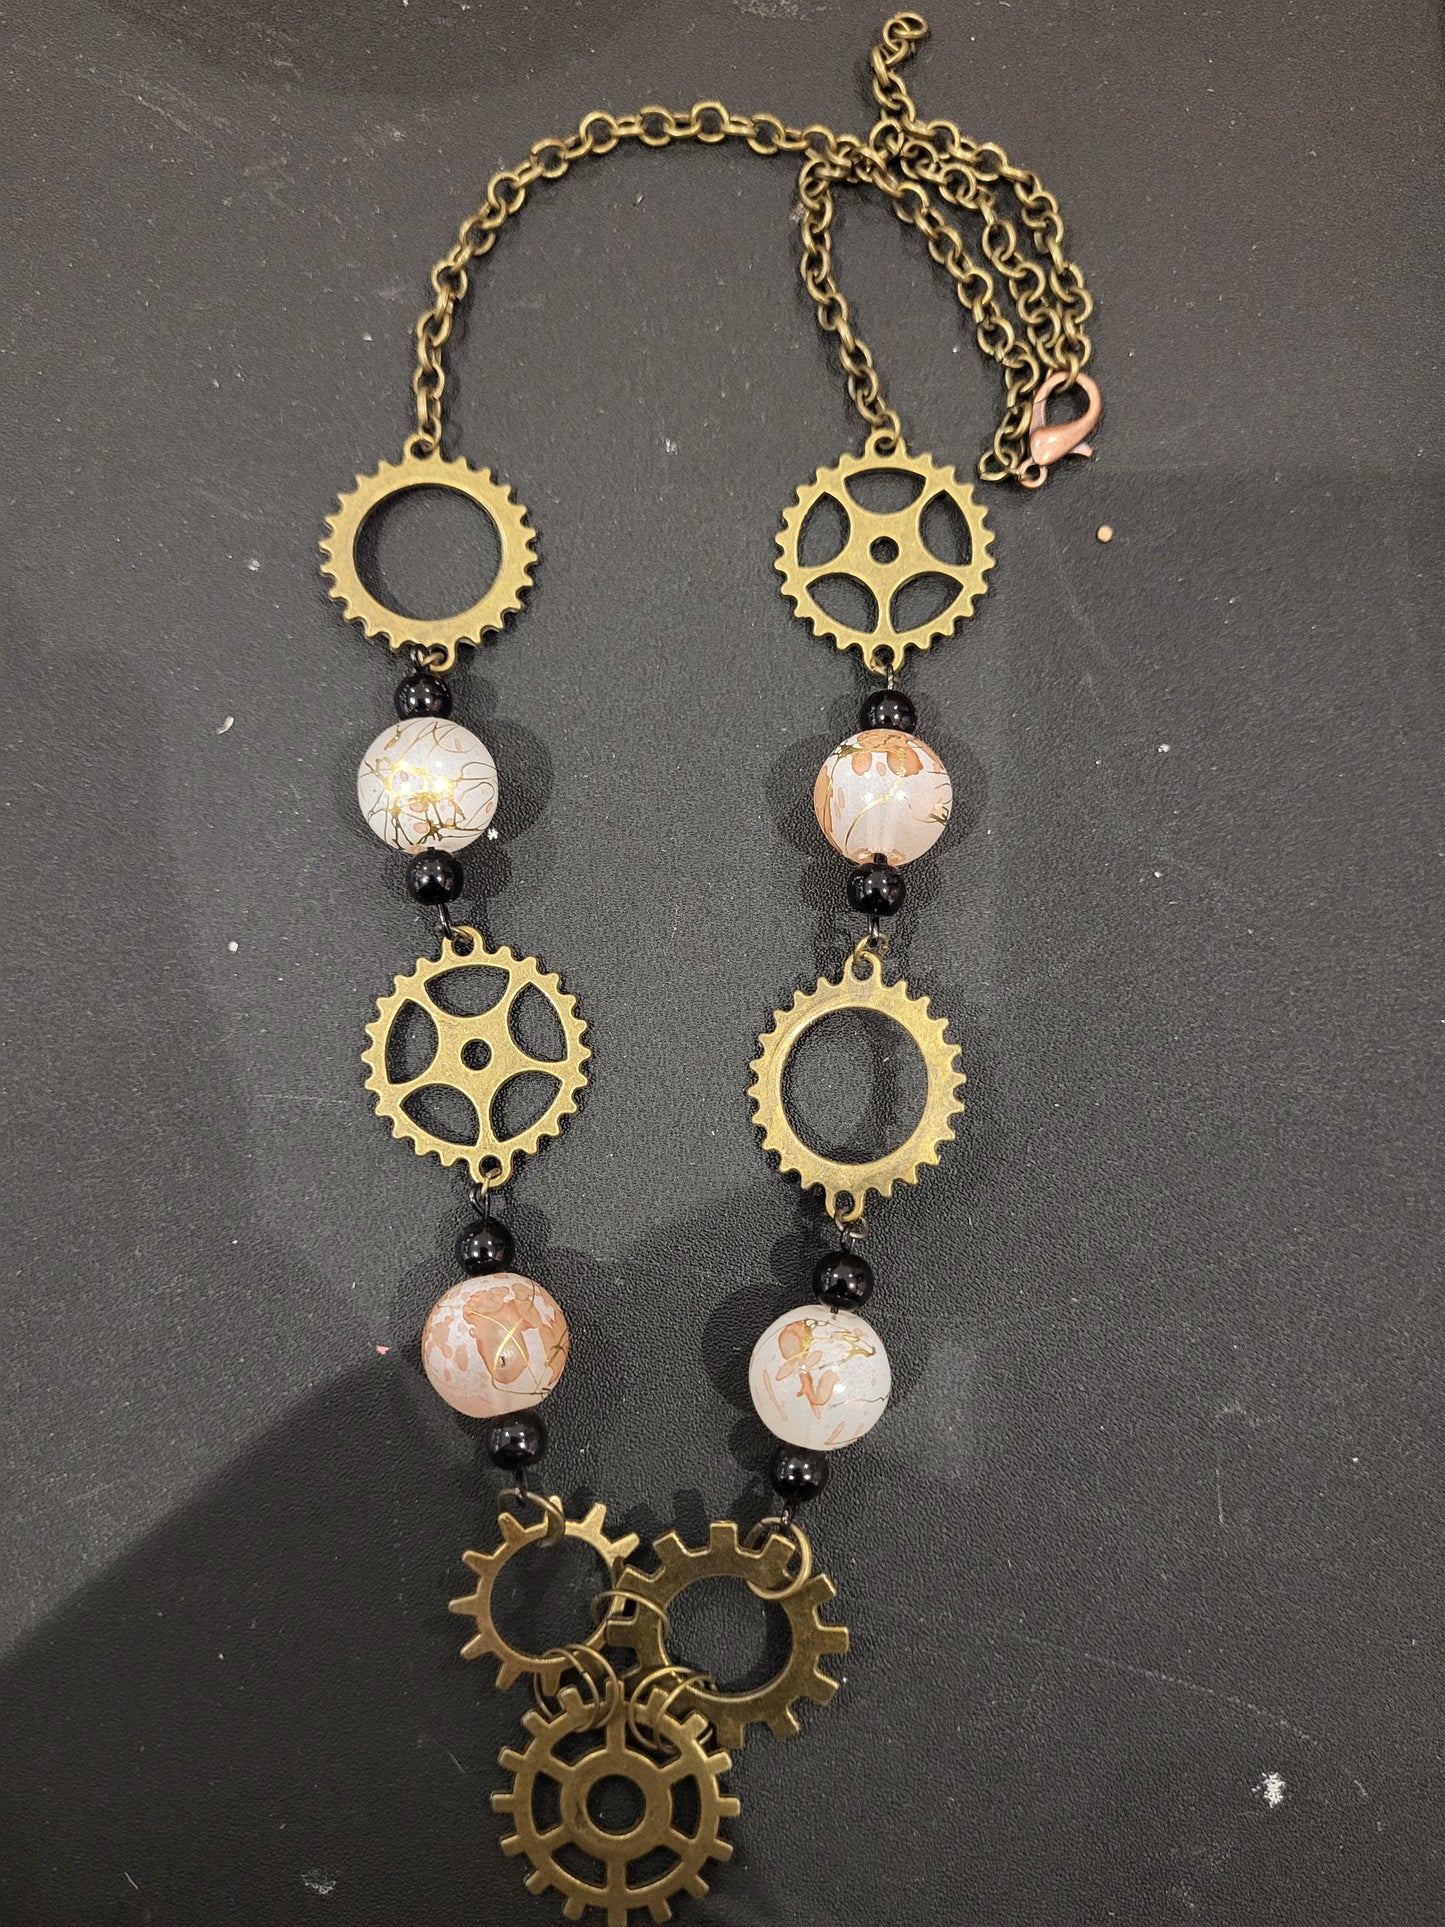 Handmade steampunk pink beads and gears necklace and earring set